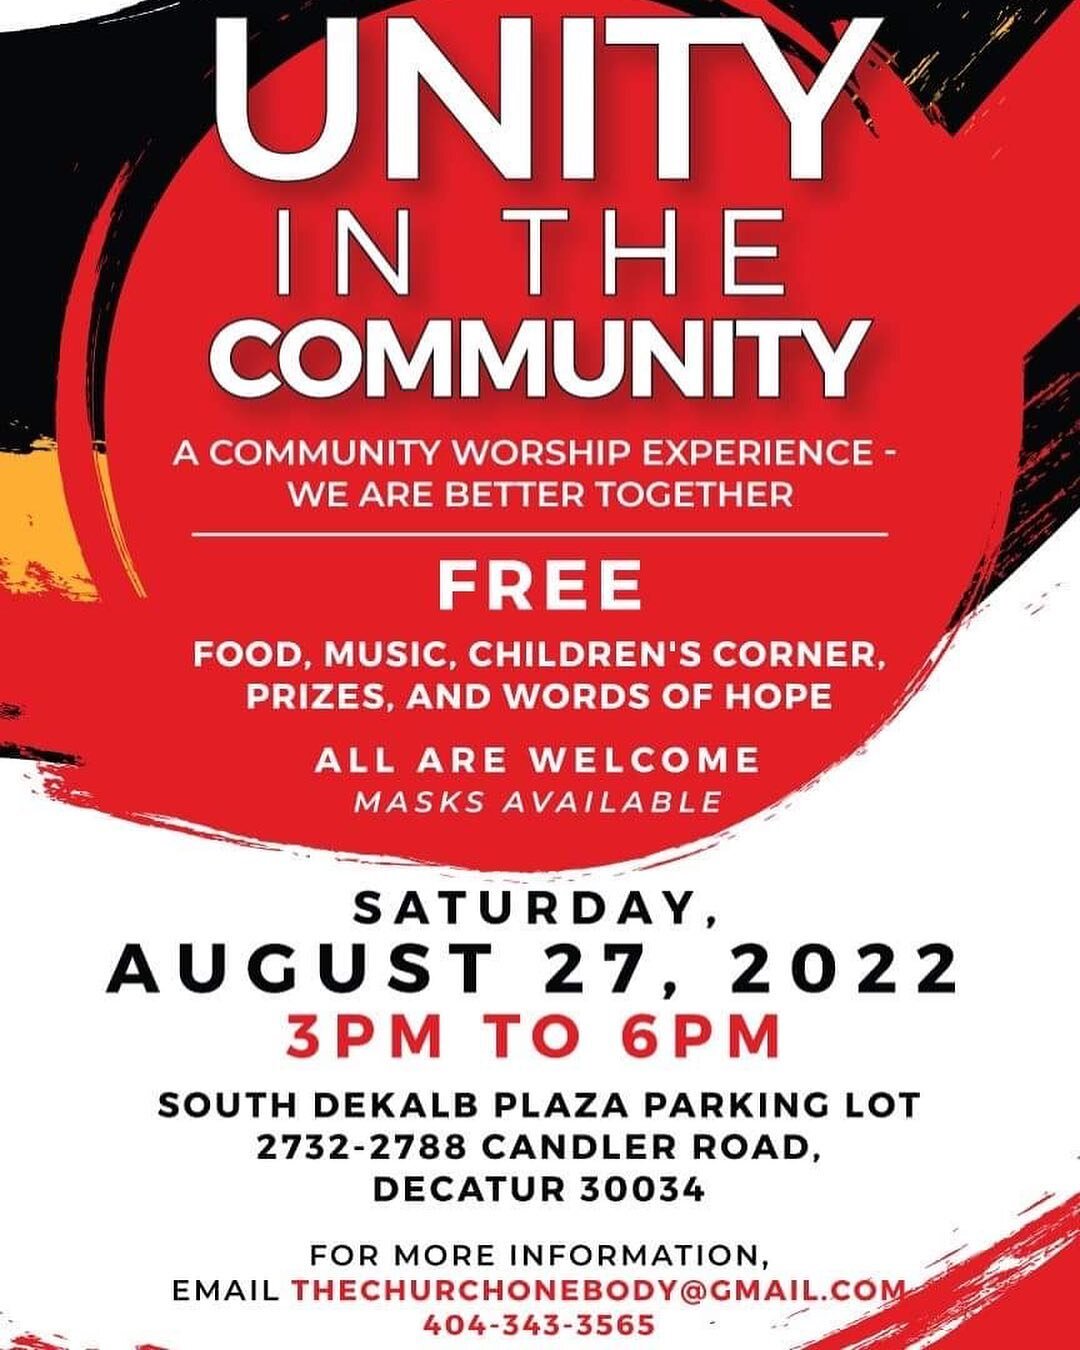 Excited to be apart of this amazing community event tomorrow! Hosted by several local churches, this event is sure be a blessing to all who attend. Fashion Mr&rsquo;s table will have FREE clothing and some shoes. Please come out and support! Share th